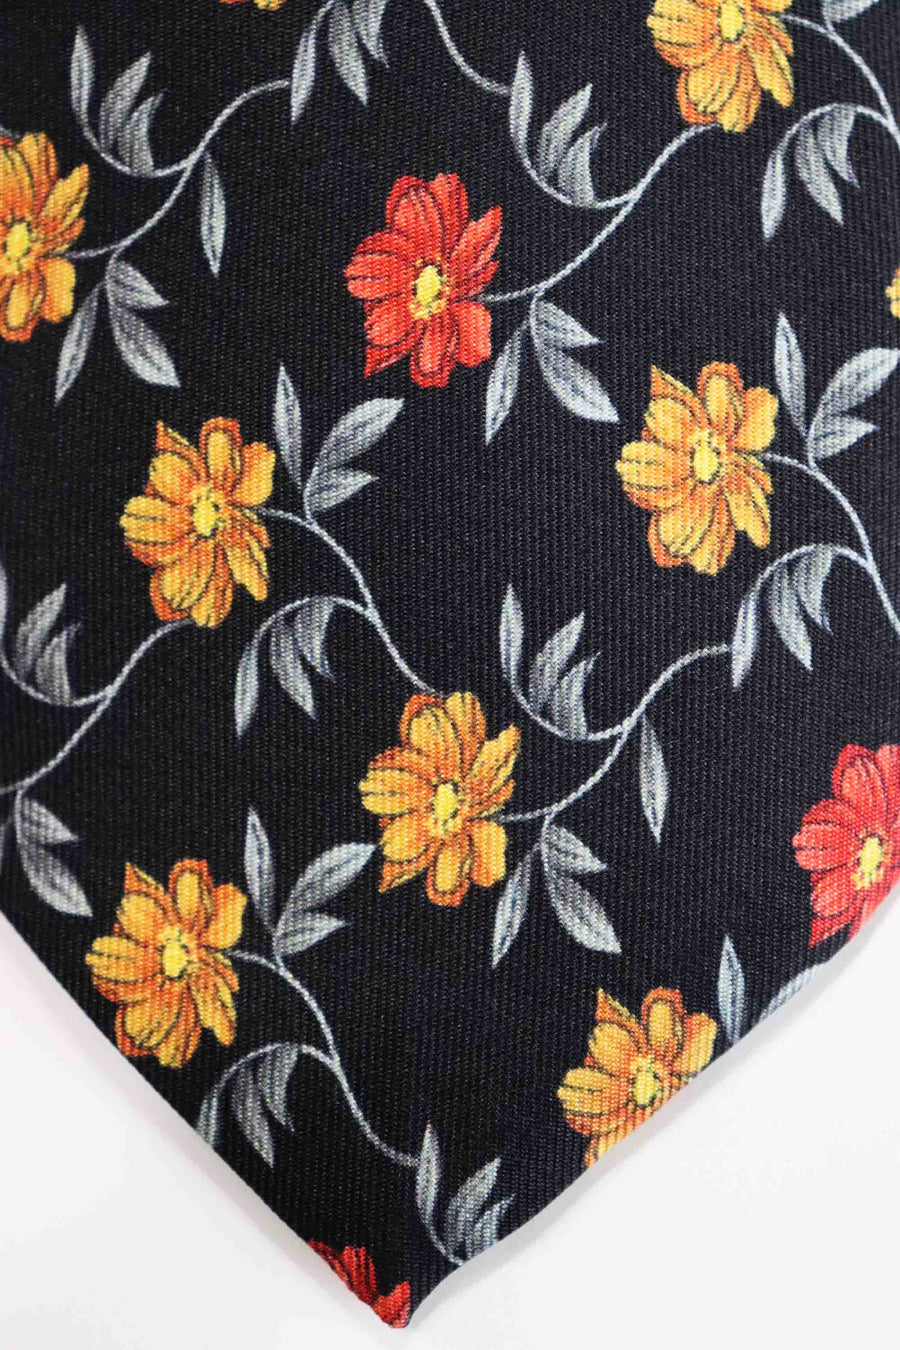 Rembrandt Tie | Black Yellow Red Floral